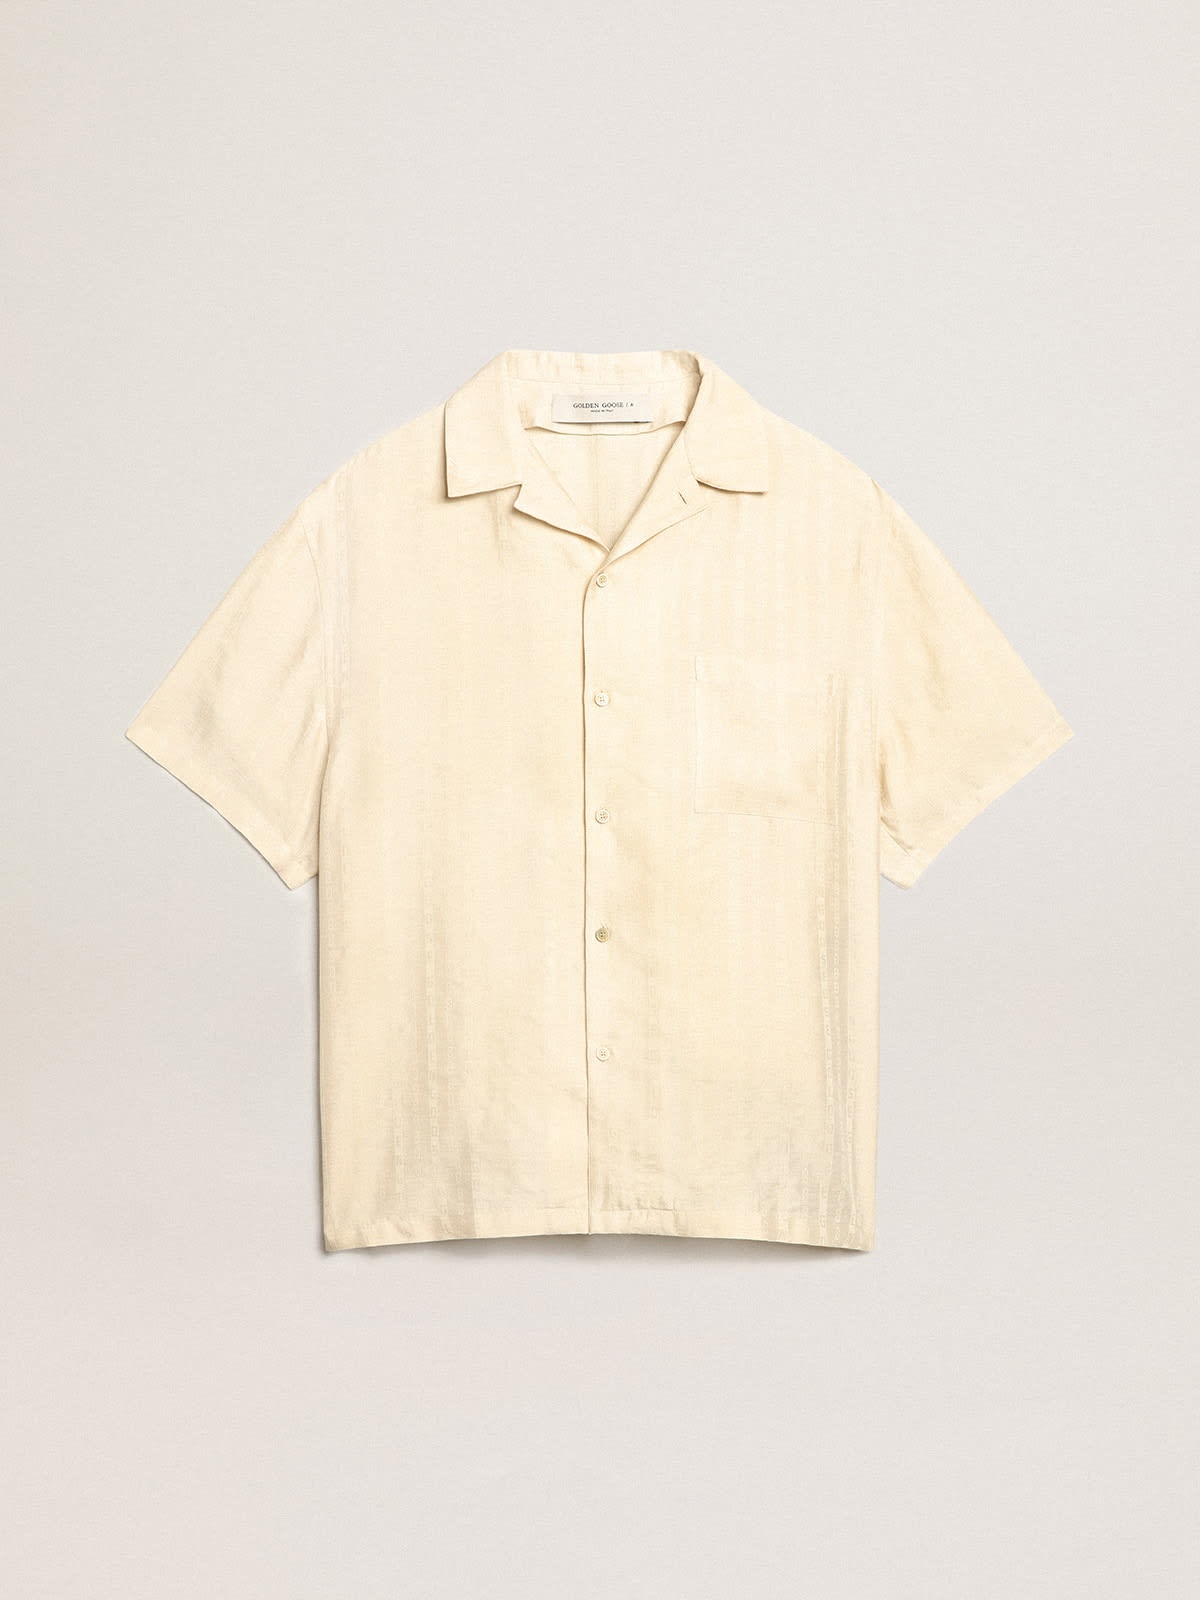 Short-sleeved shirt in parchment-colored linen - 1